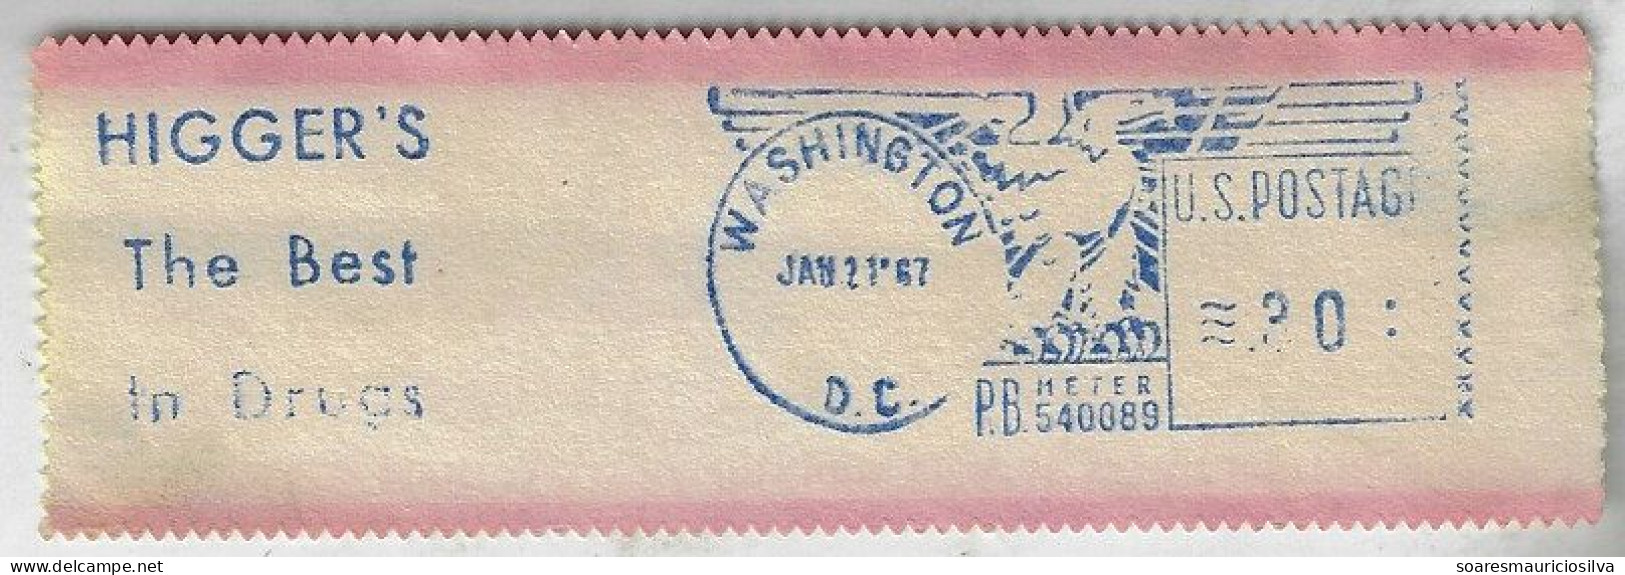 USA 1967 Label With Meter Stamp Pitney Bowes Slogan Higger's The Best In Drugs From Washington 30 Cents - Drogen